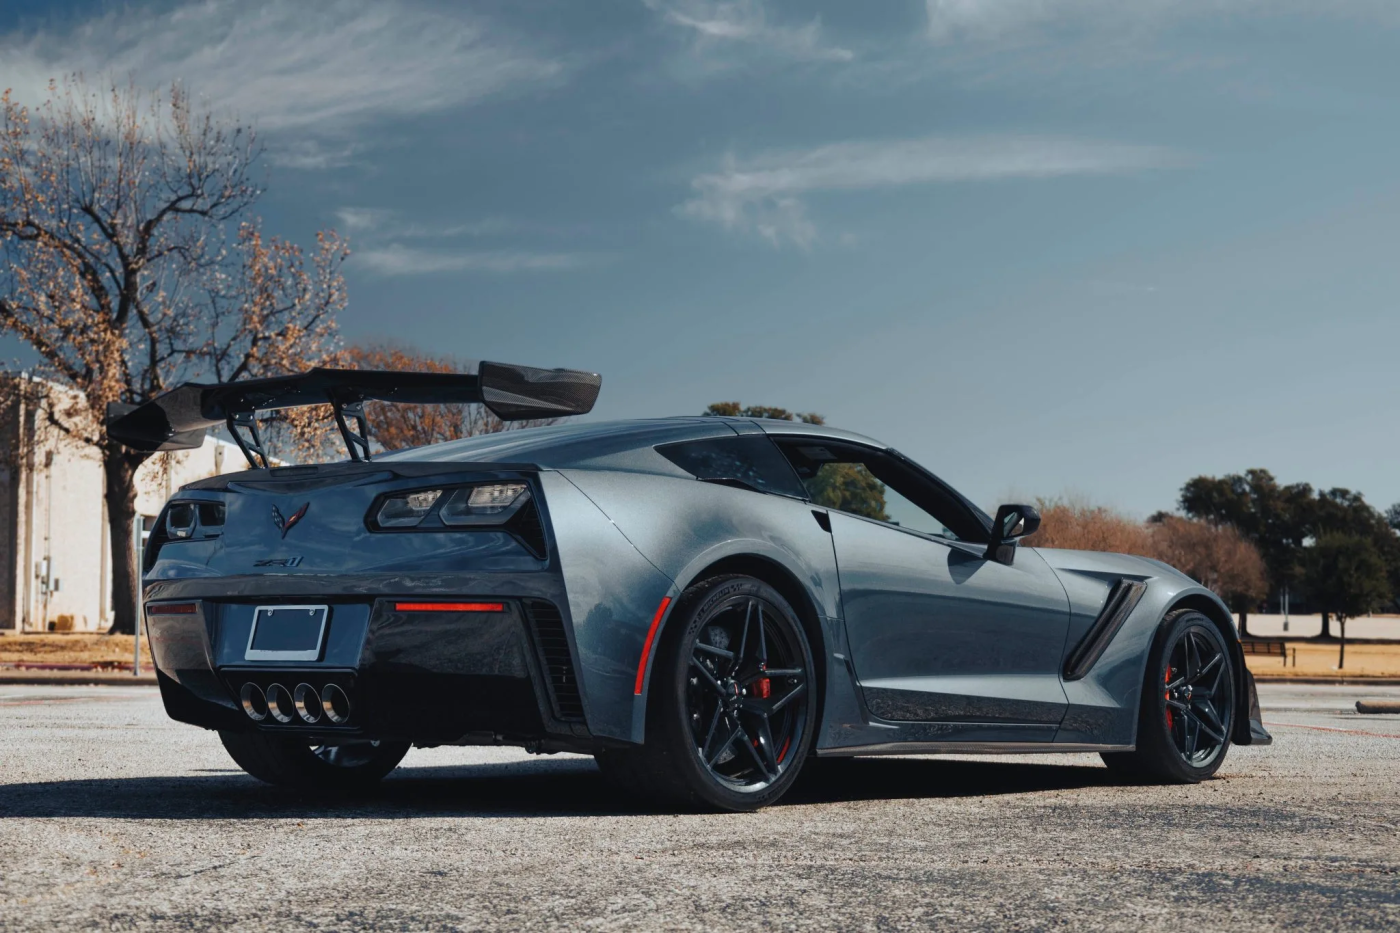 2019 Chevrolet Corvette ZR1 With Only 250 Miles Now On Sale!